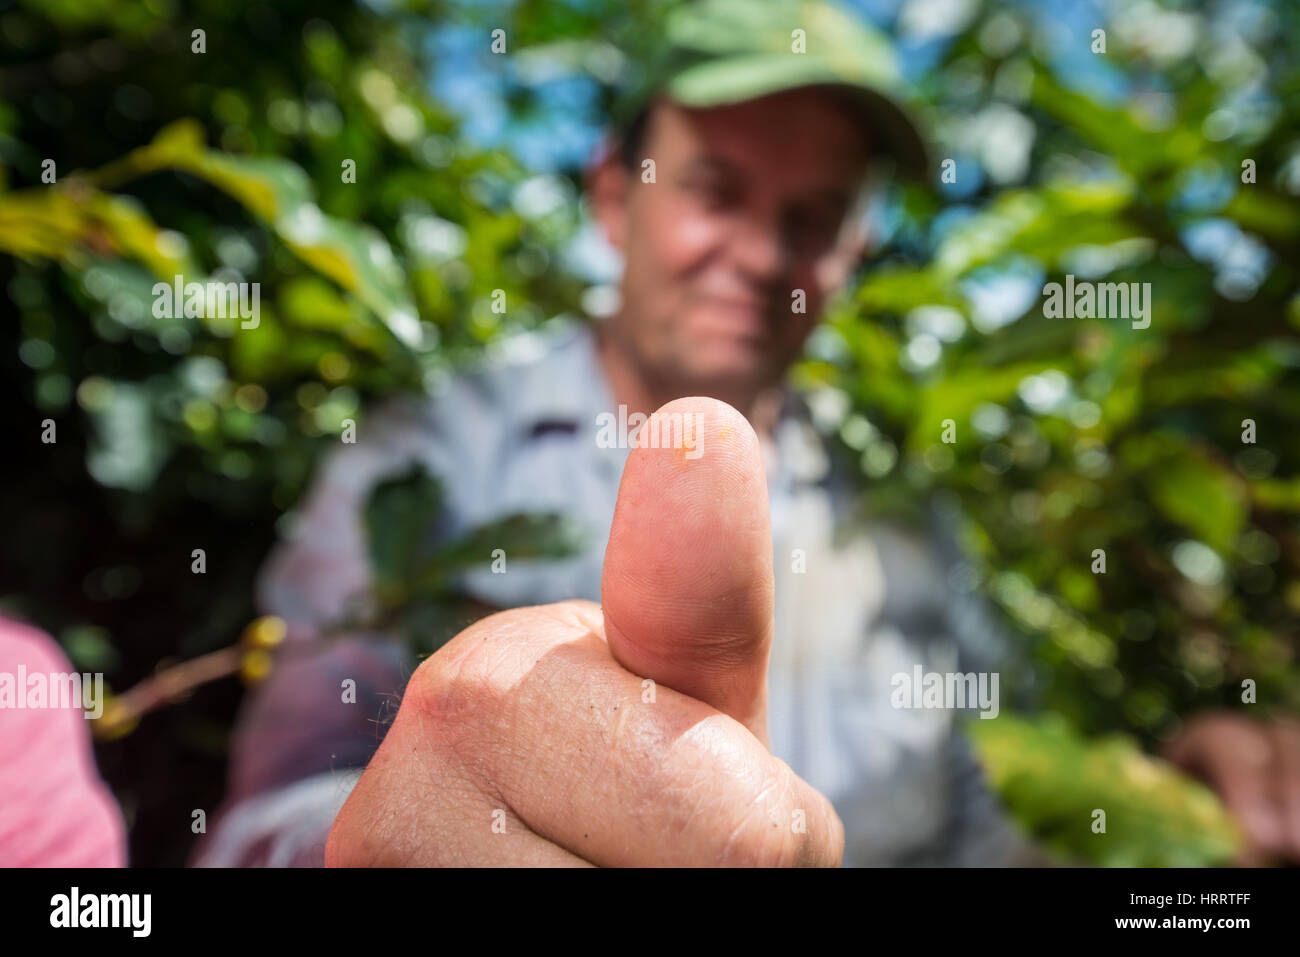 A coffee farmer shows off leaf rust fungus on his thumb, after examining coffee plant leaves that have been infected with leaf rust. Stock Photo